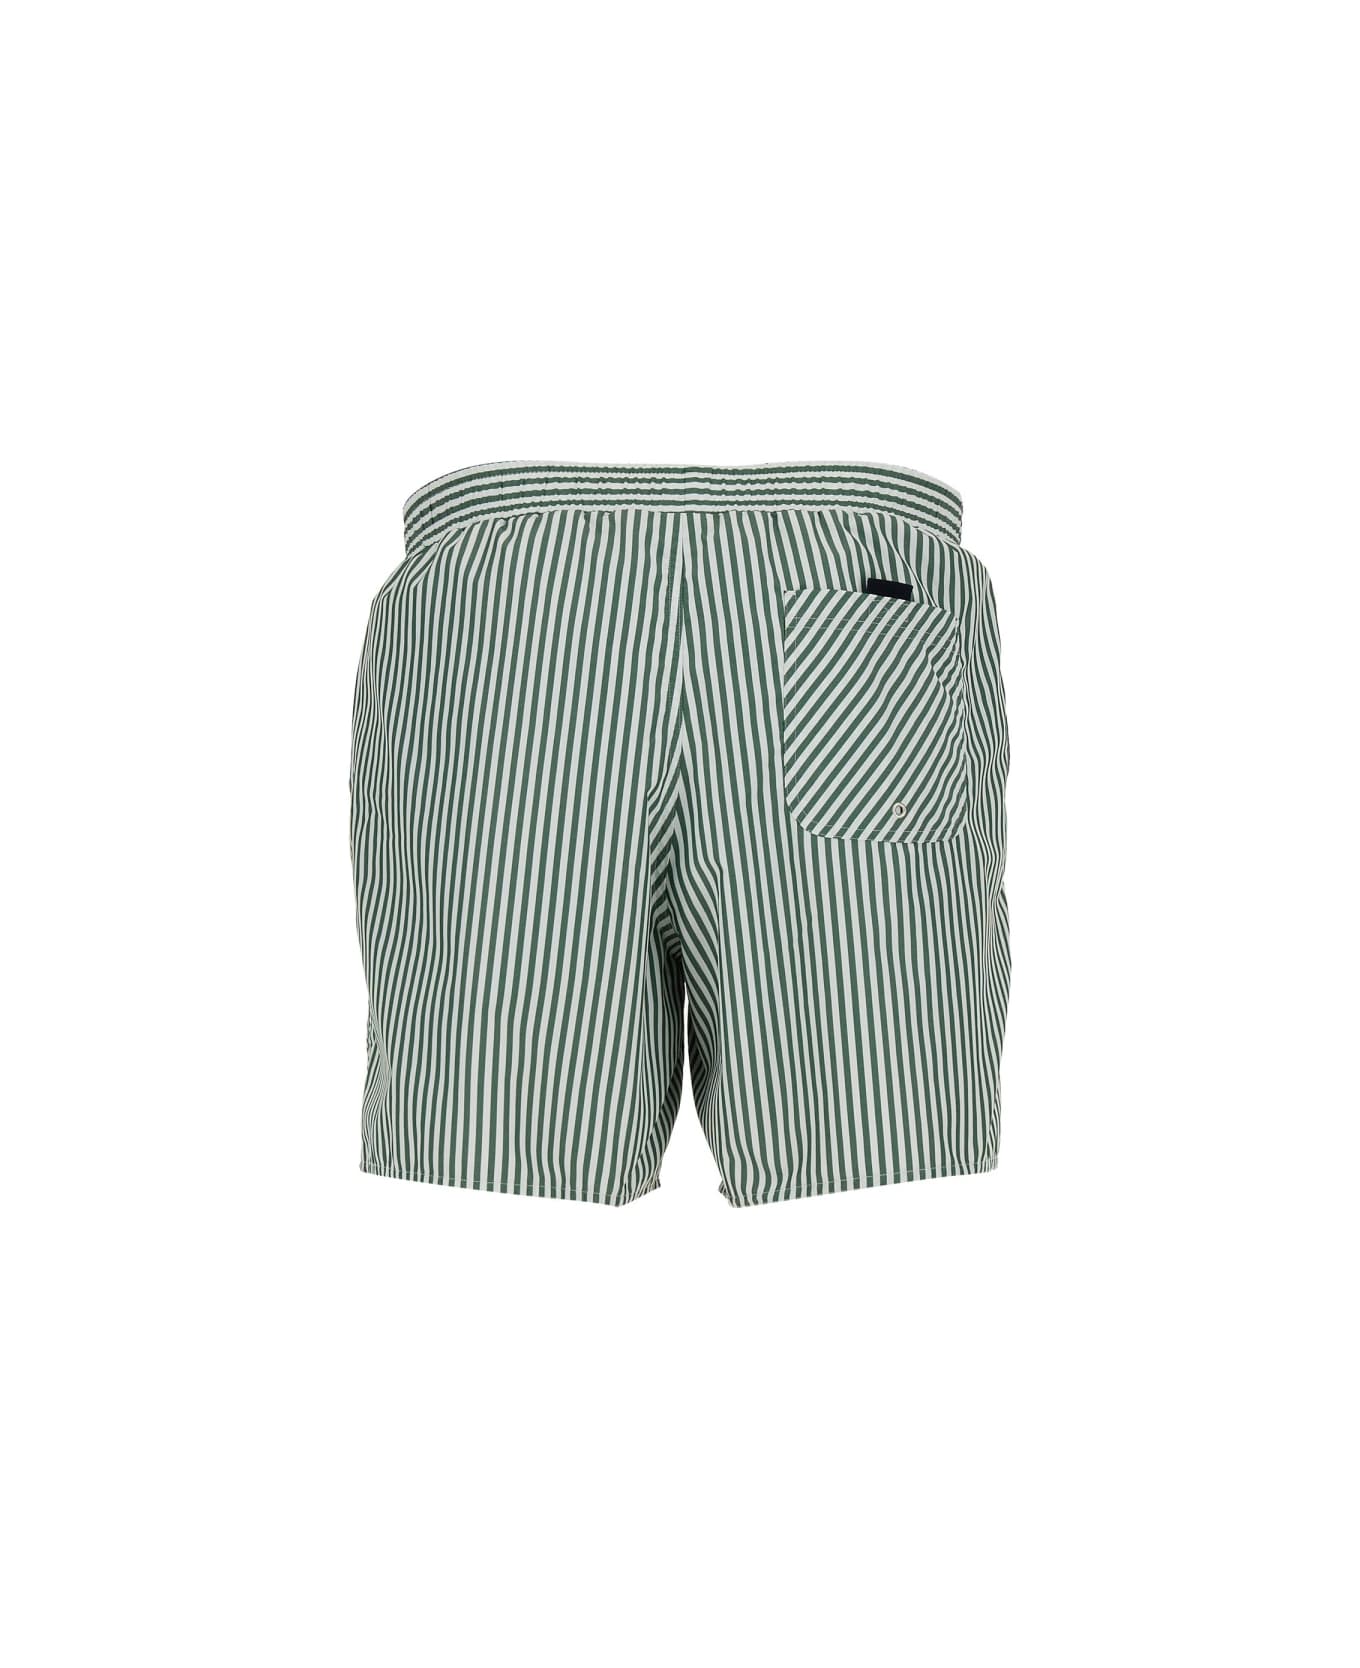 Lacoste Swimsuit - White/green